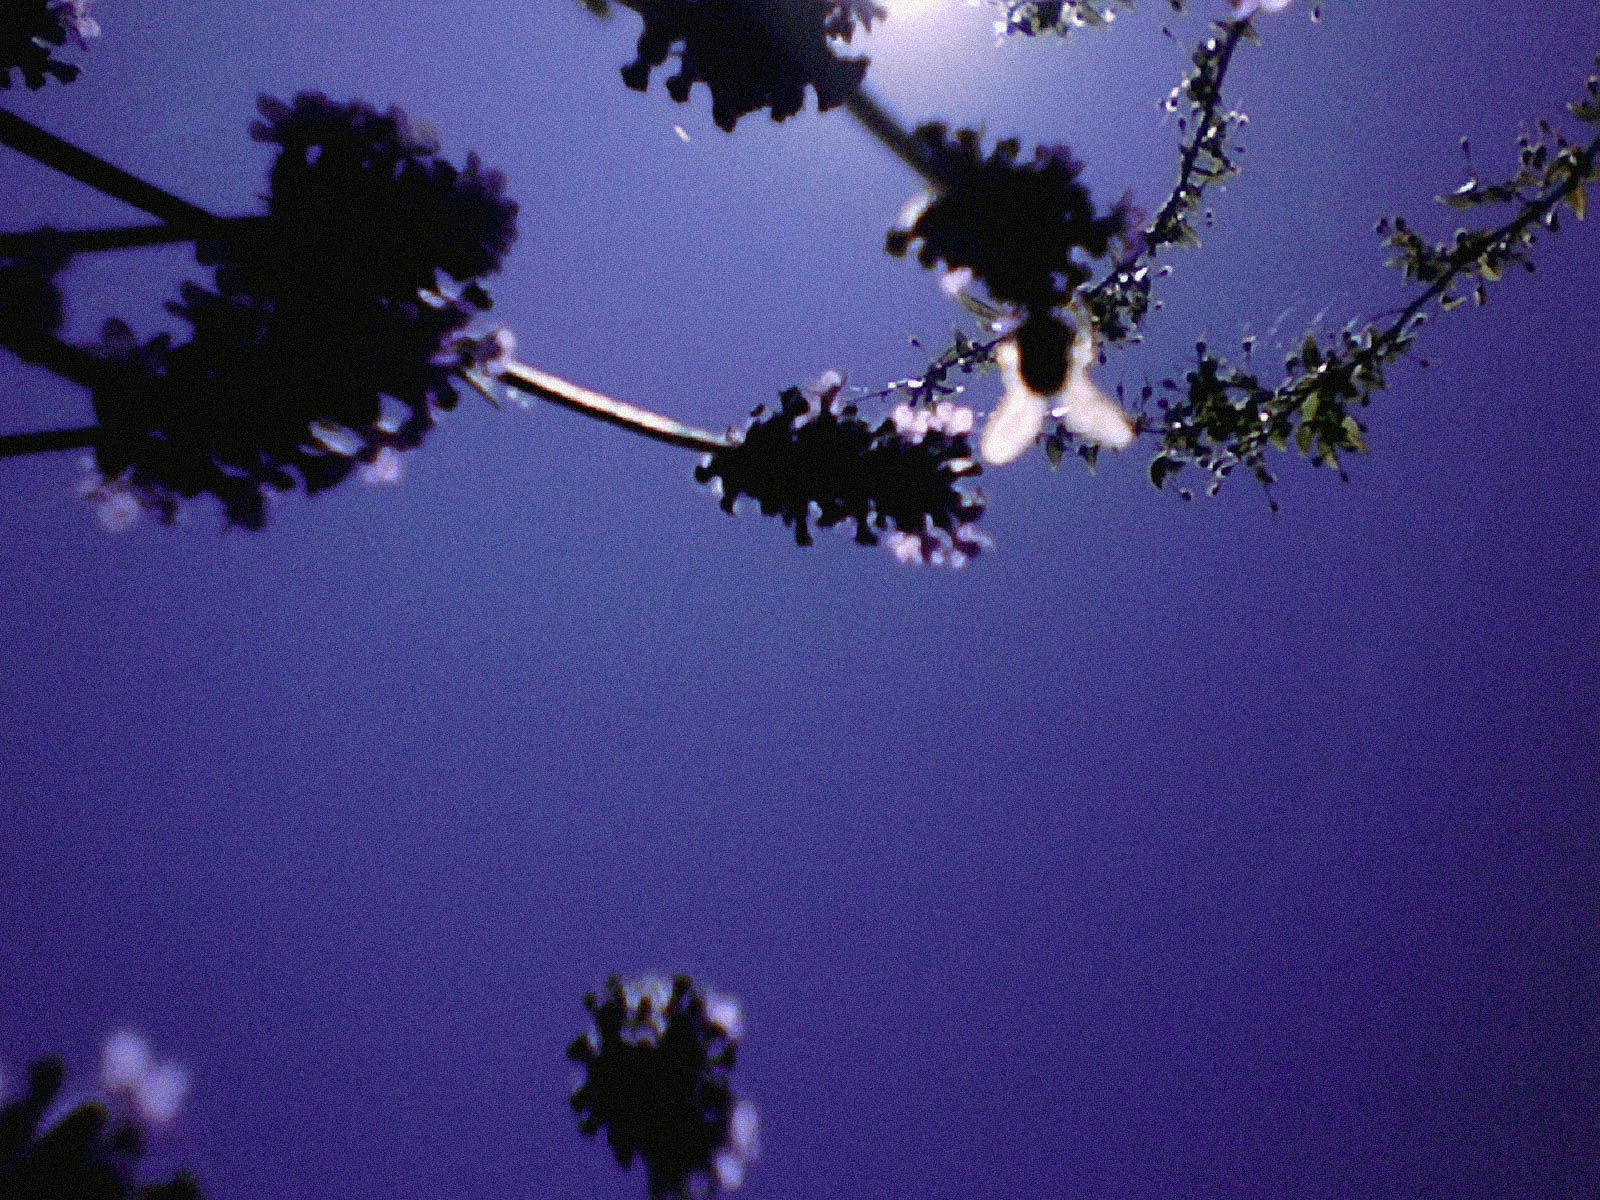 A view of lavender flowers silhouetted against a deep blue sky with a faint outline of a bee in flight.